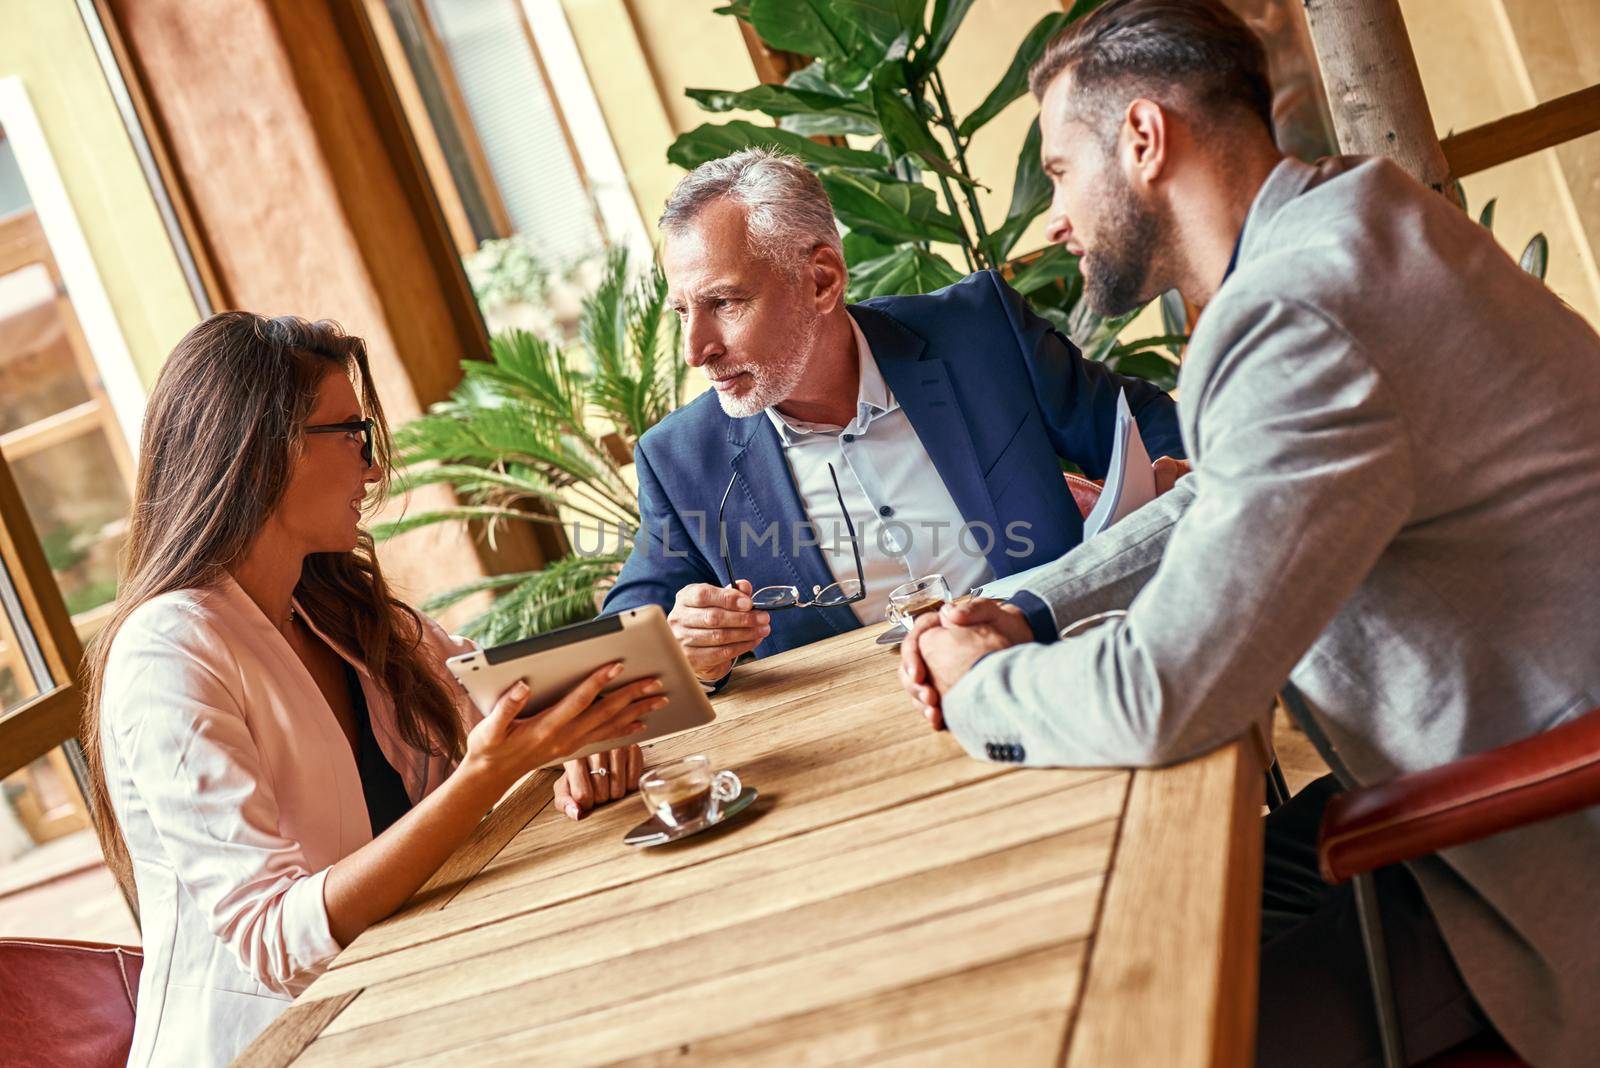 Business lunch. Three people in the restaurant sitting at table discussing project woman holding digital tablet explaining ideas looking at senior man smiling cheerful